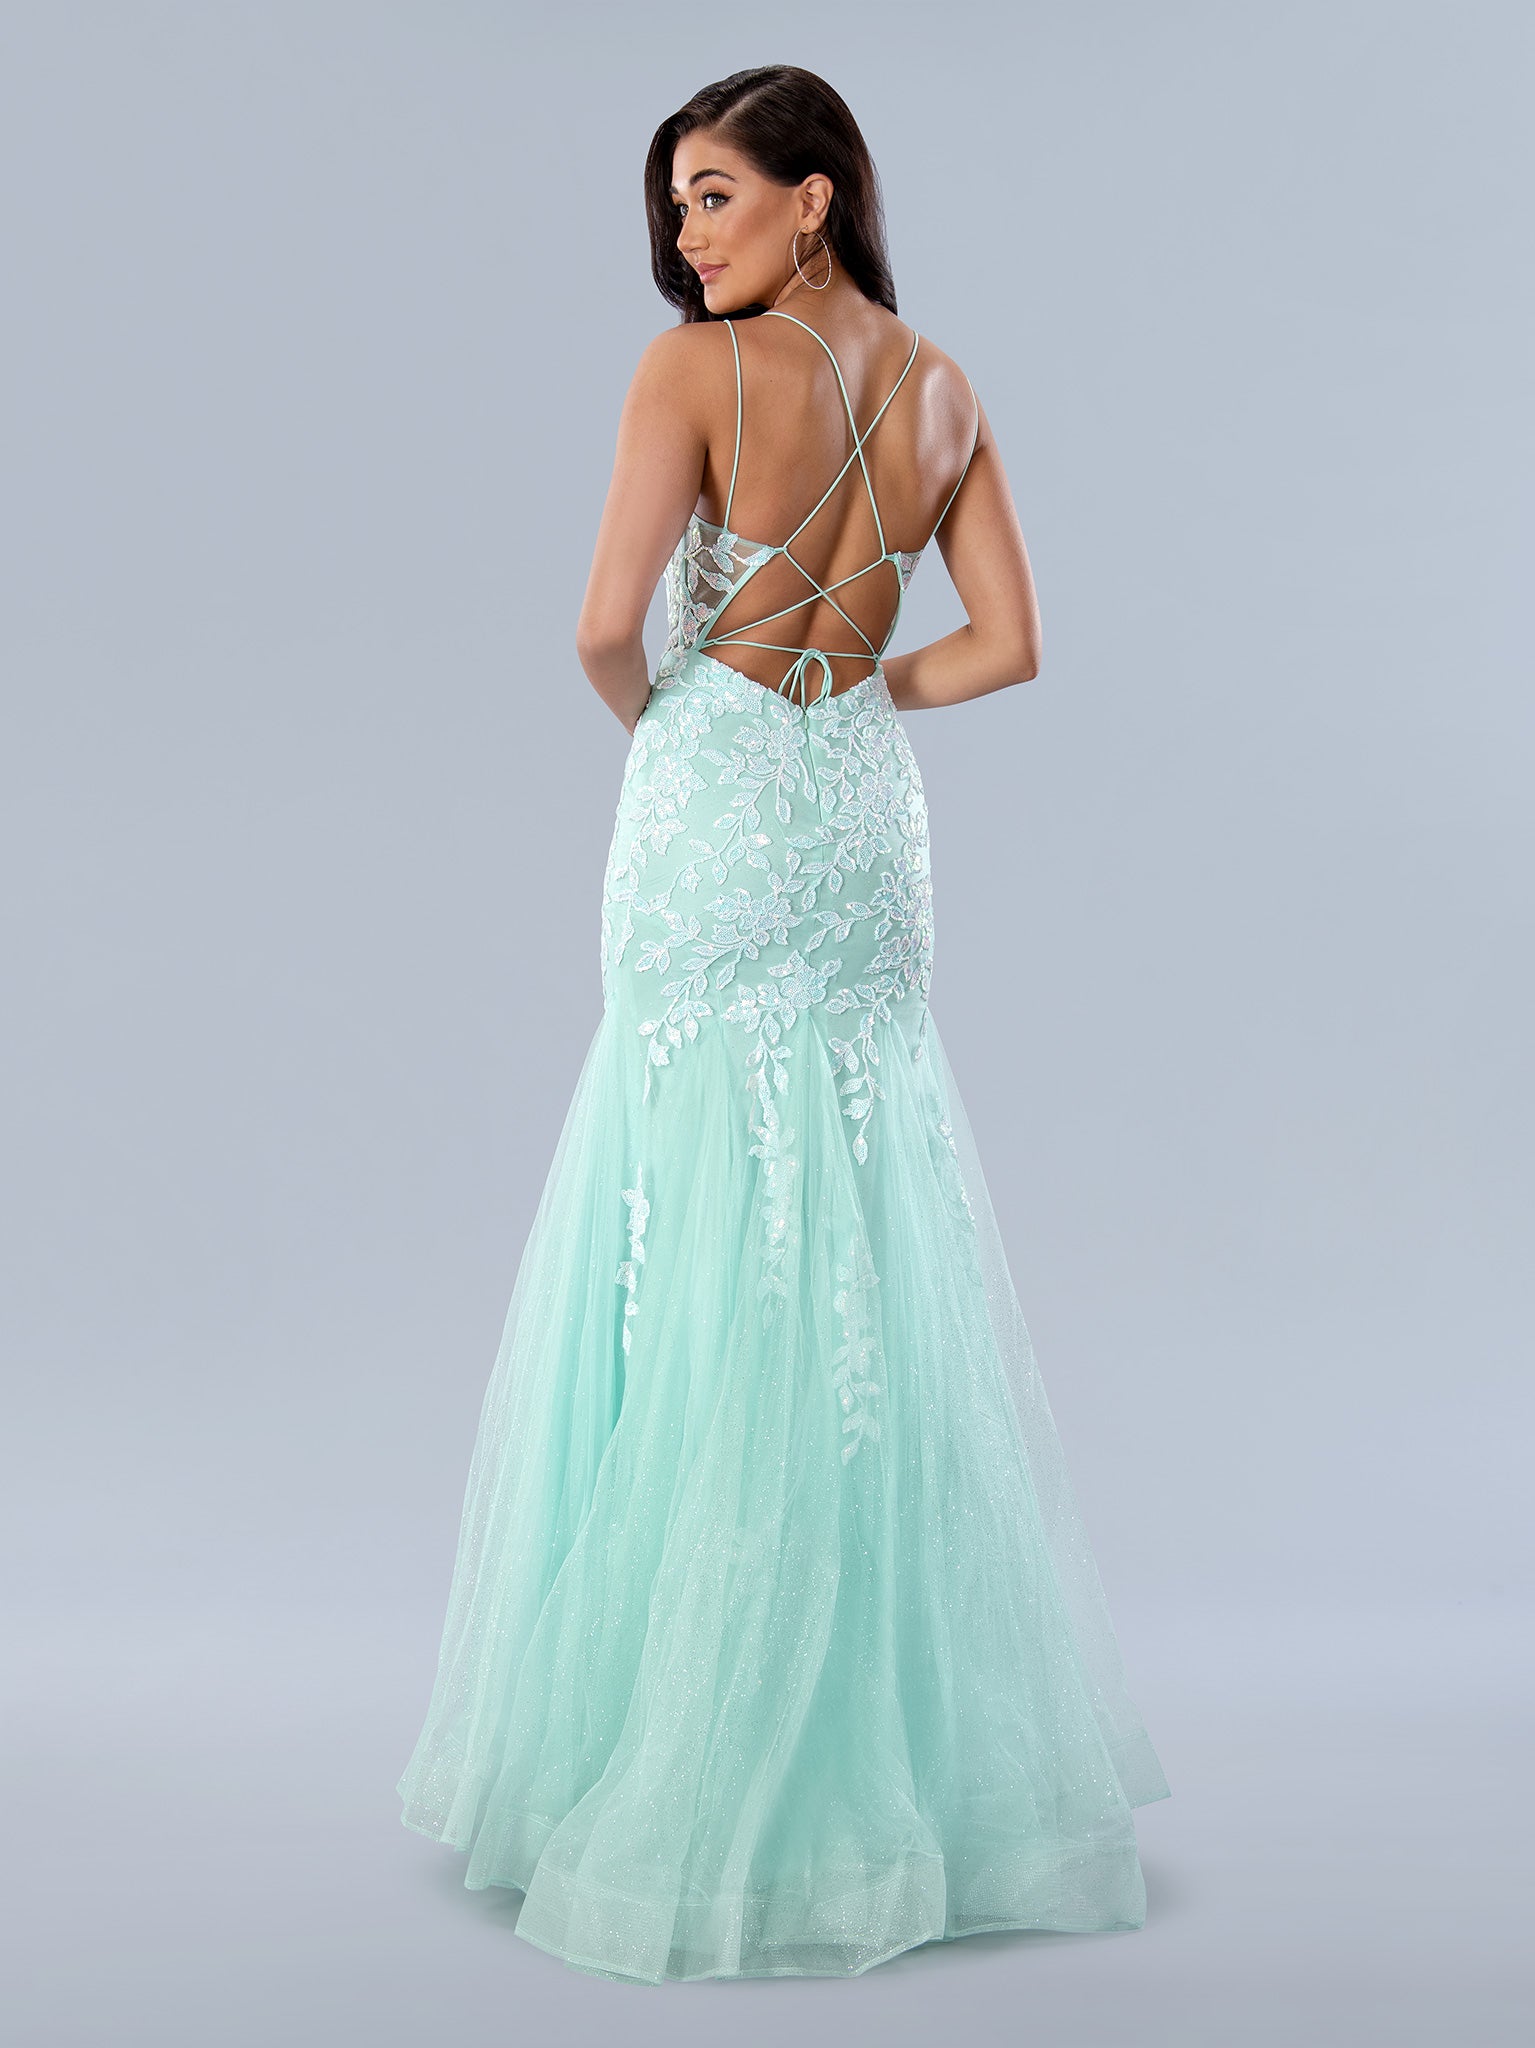 The Stella Couture 24229 is a stunning choice for prom. Crafted from shimmer fabric, this sleek and stylish mermaid dress features sequin lace detail and a sheer corset to ensure a show-stopping look. With a backless design, it's sure to turn heads.  Sizes: 0-16  Colors: Aqua